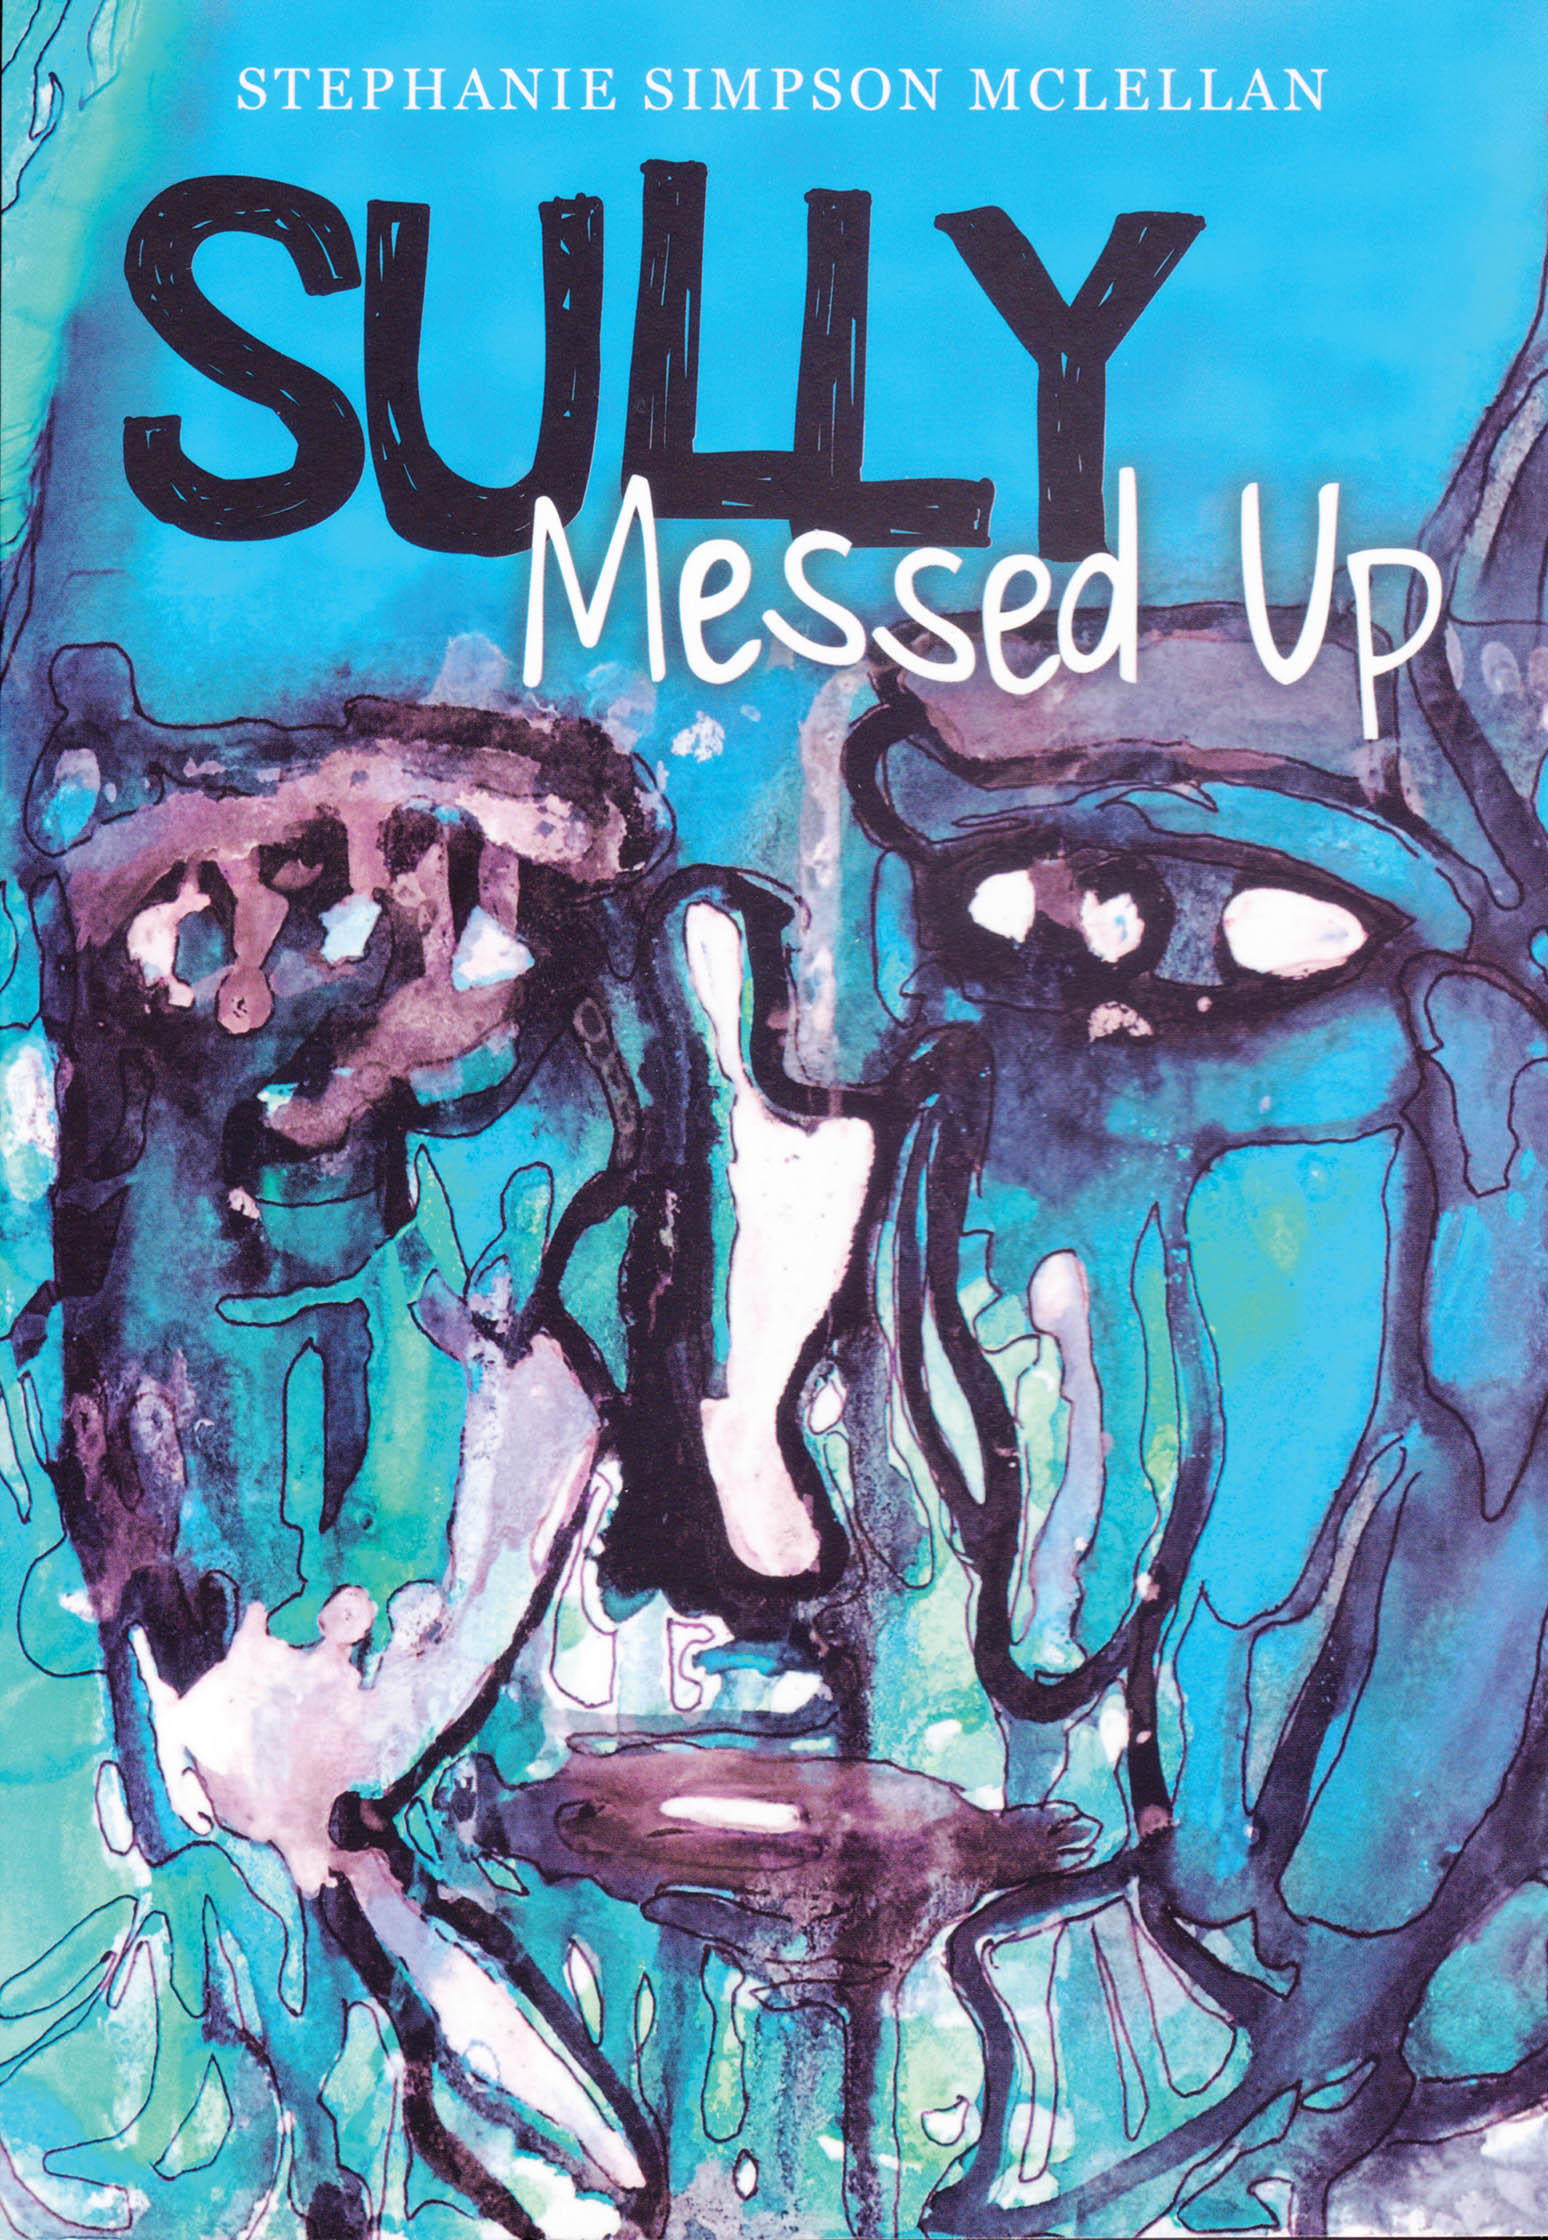 'Sully, Messed Up' book cover.